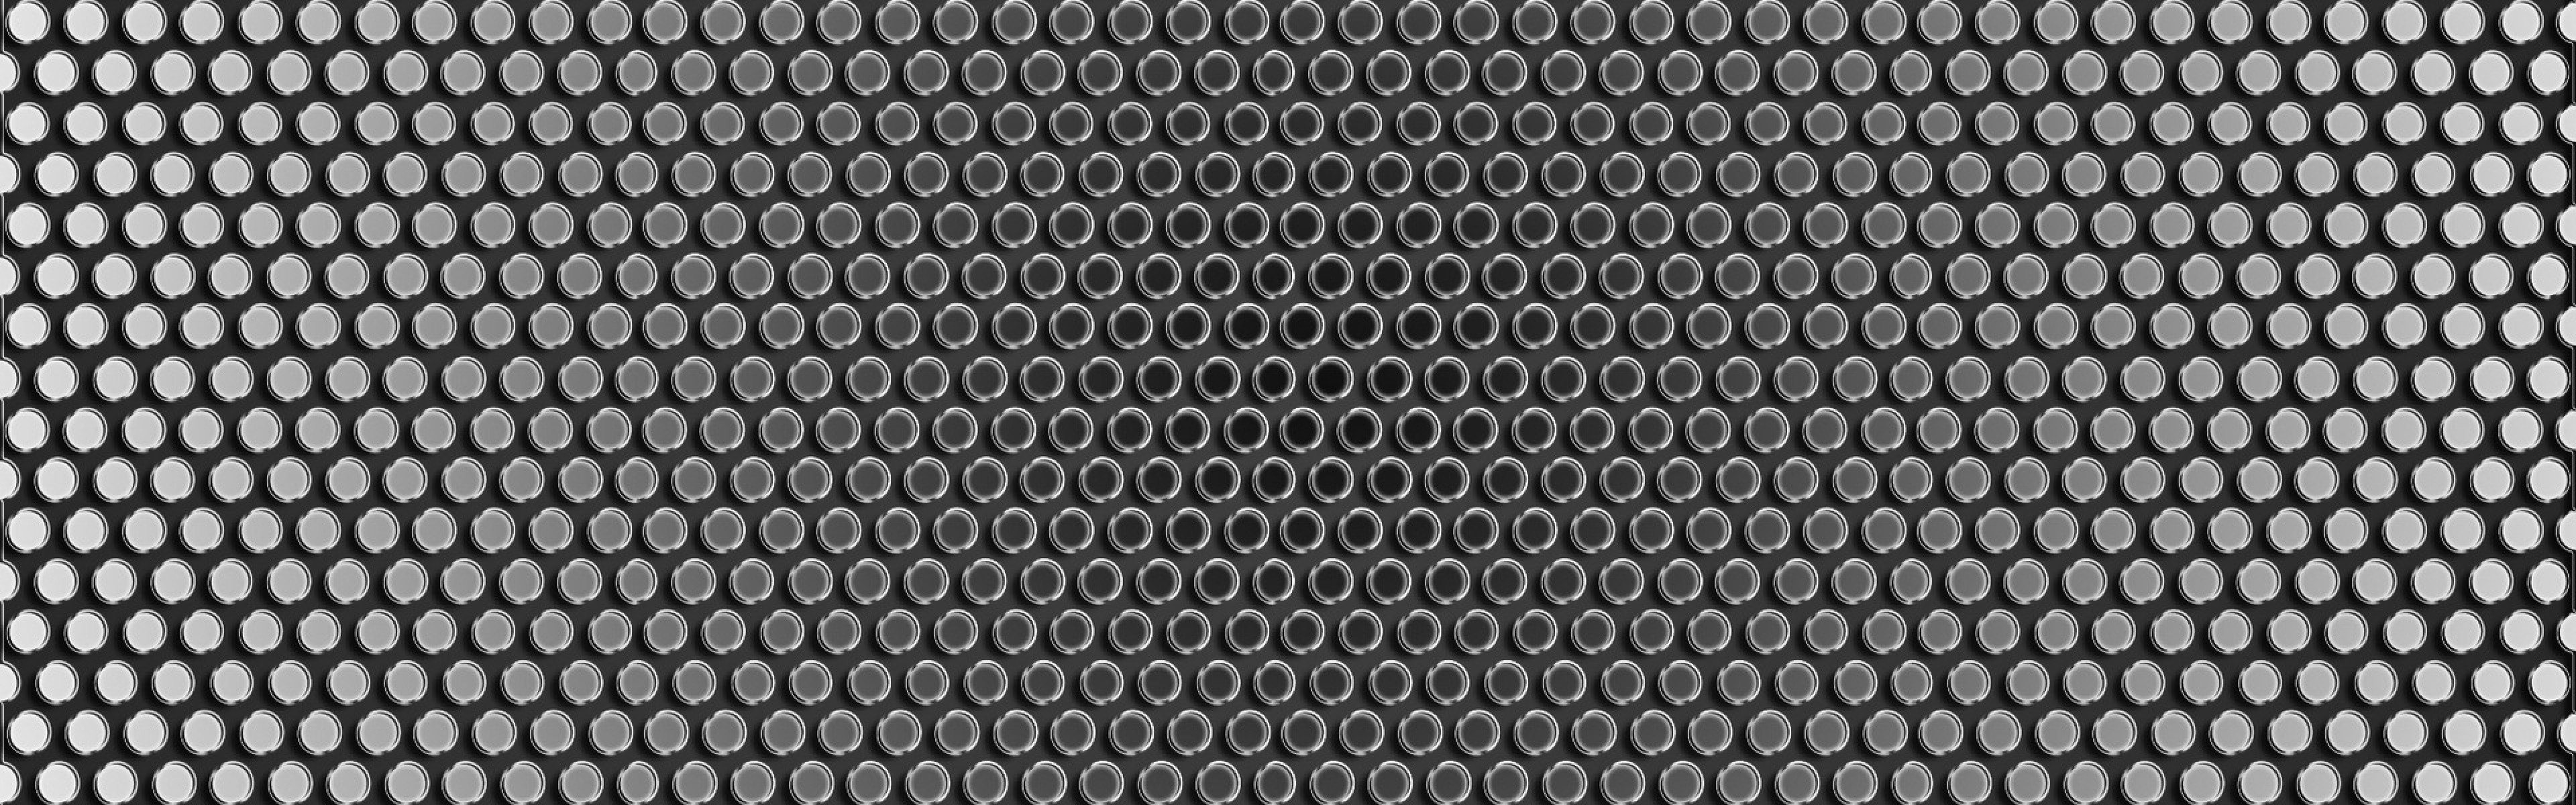 3840x1200 Stainless steel mesh background | PSDGraphics